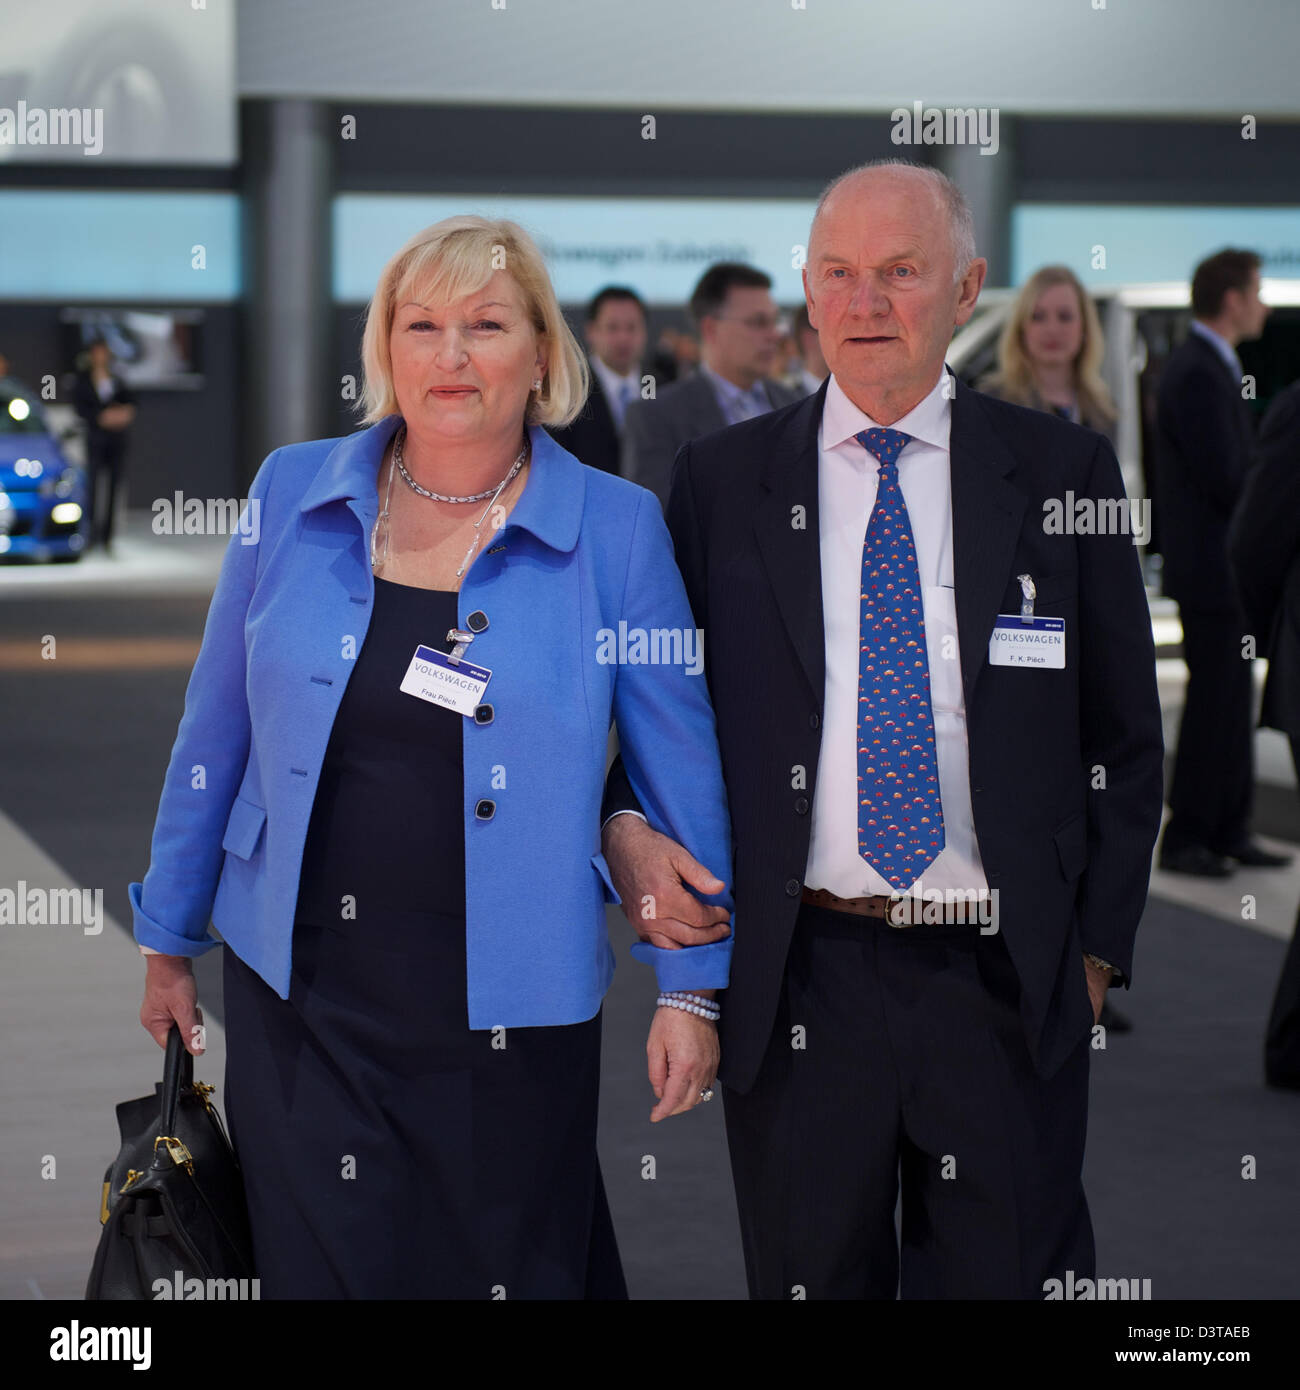 Hamburg, Germany, Ferdinand Piech, chairman of Volkswagen AG, with his wife Stock Photo